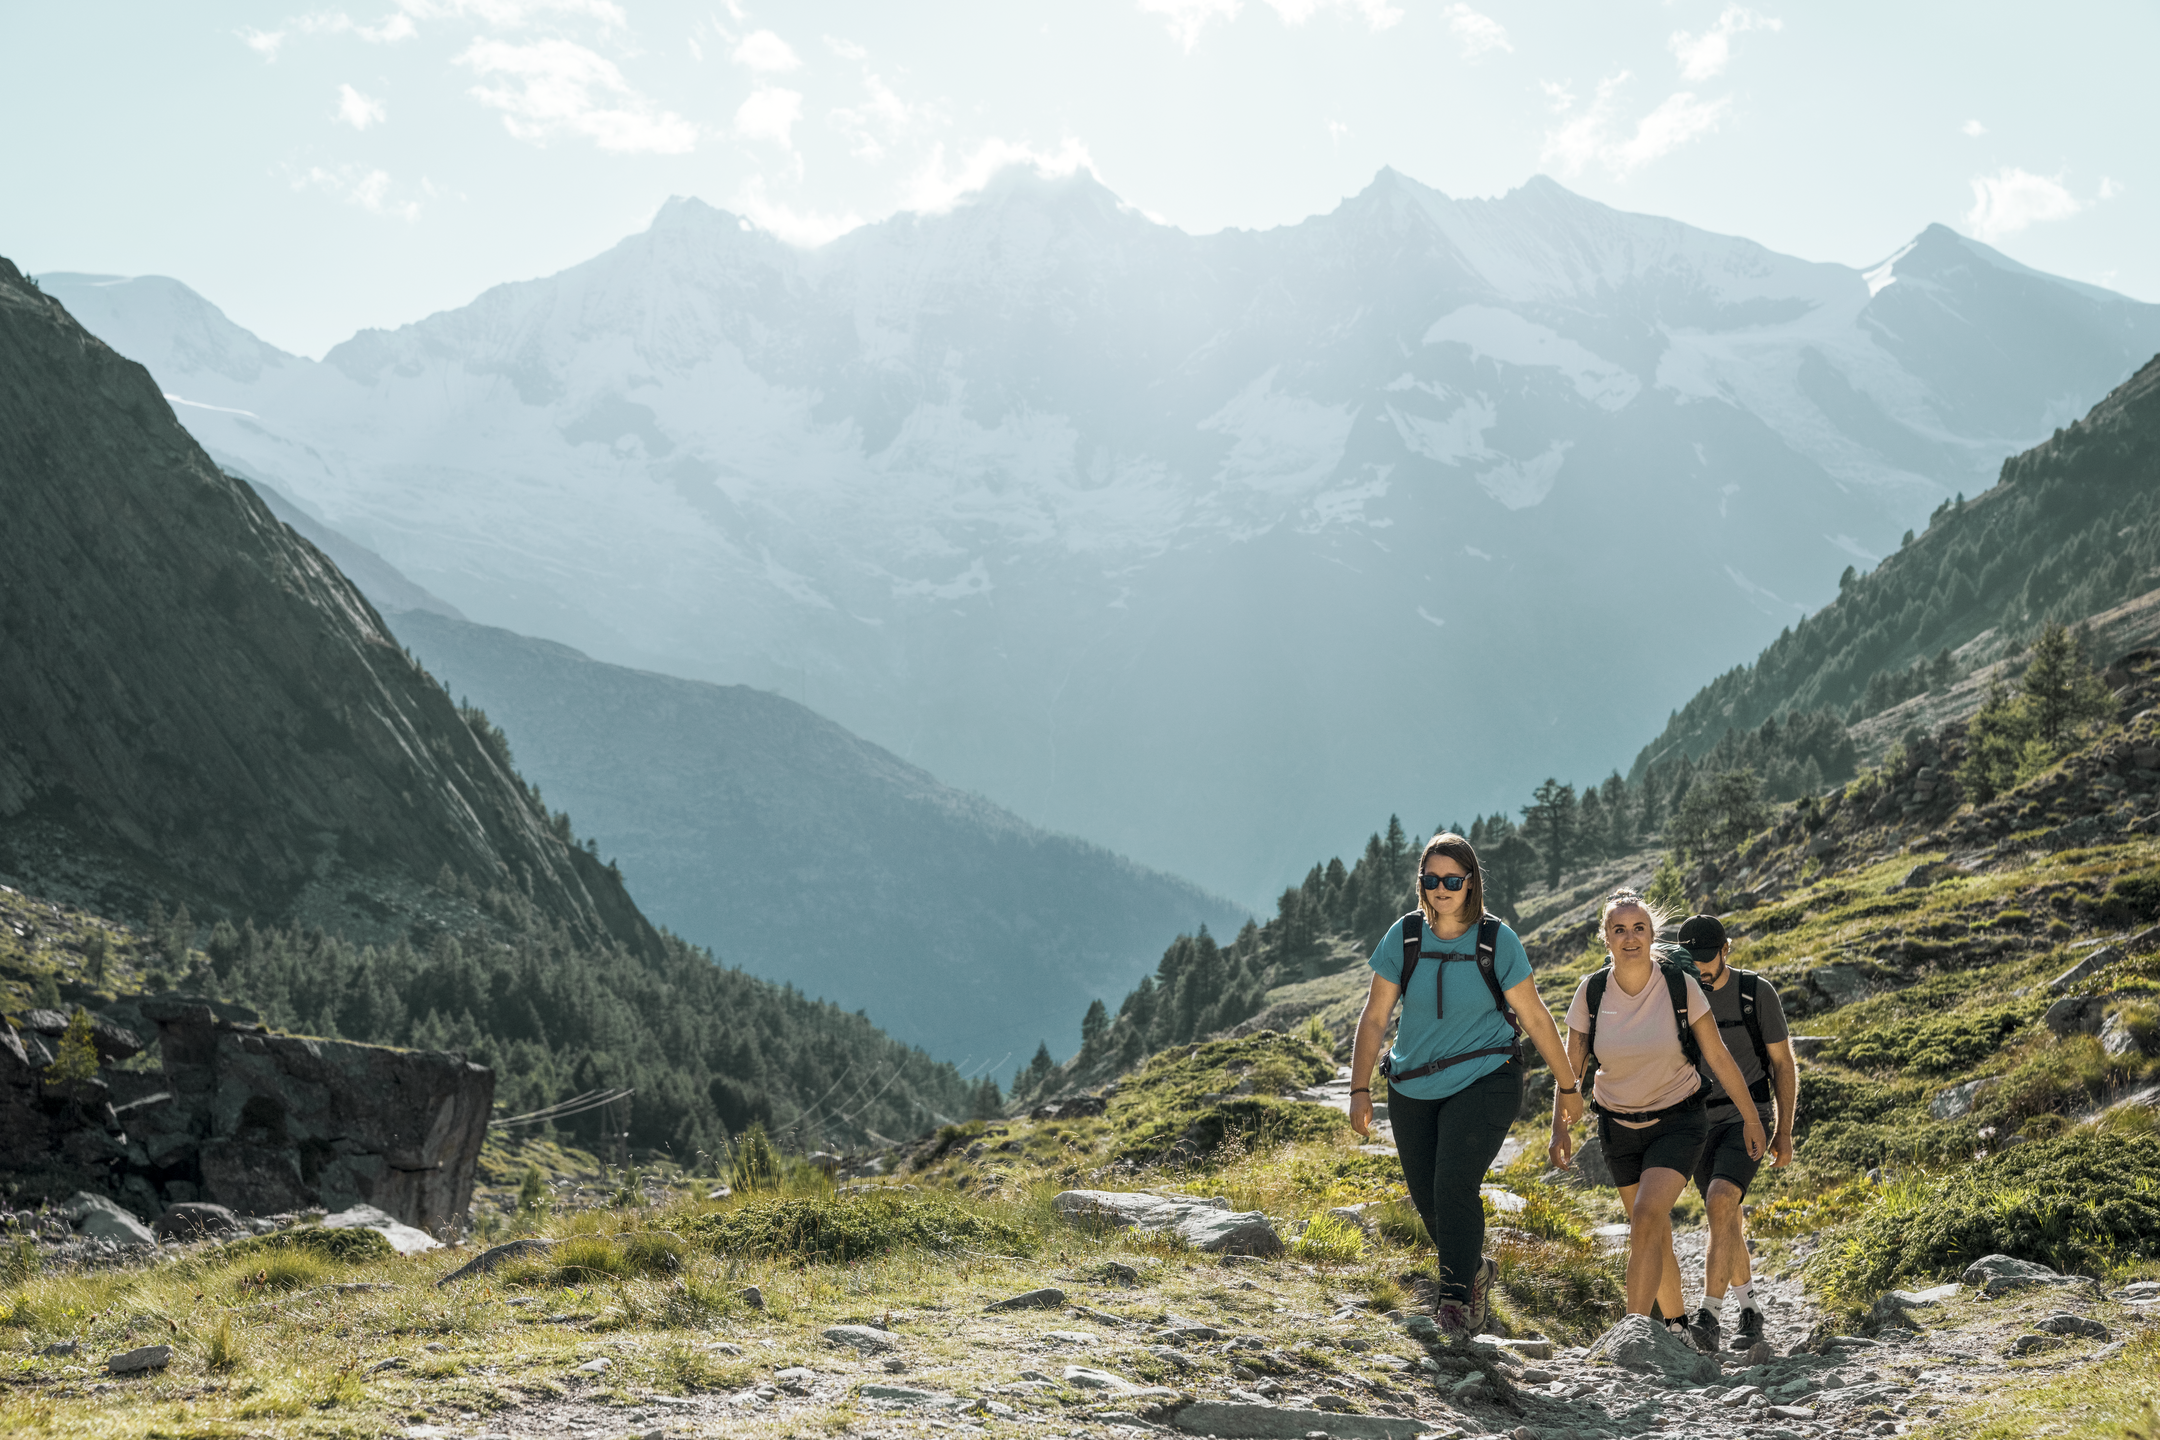 The hike to the Almagelleralp offers a breathtaking view of the Mischabel massif.